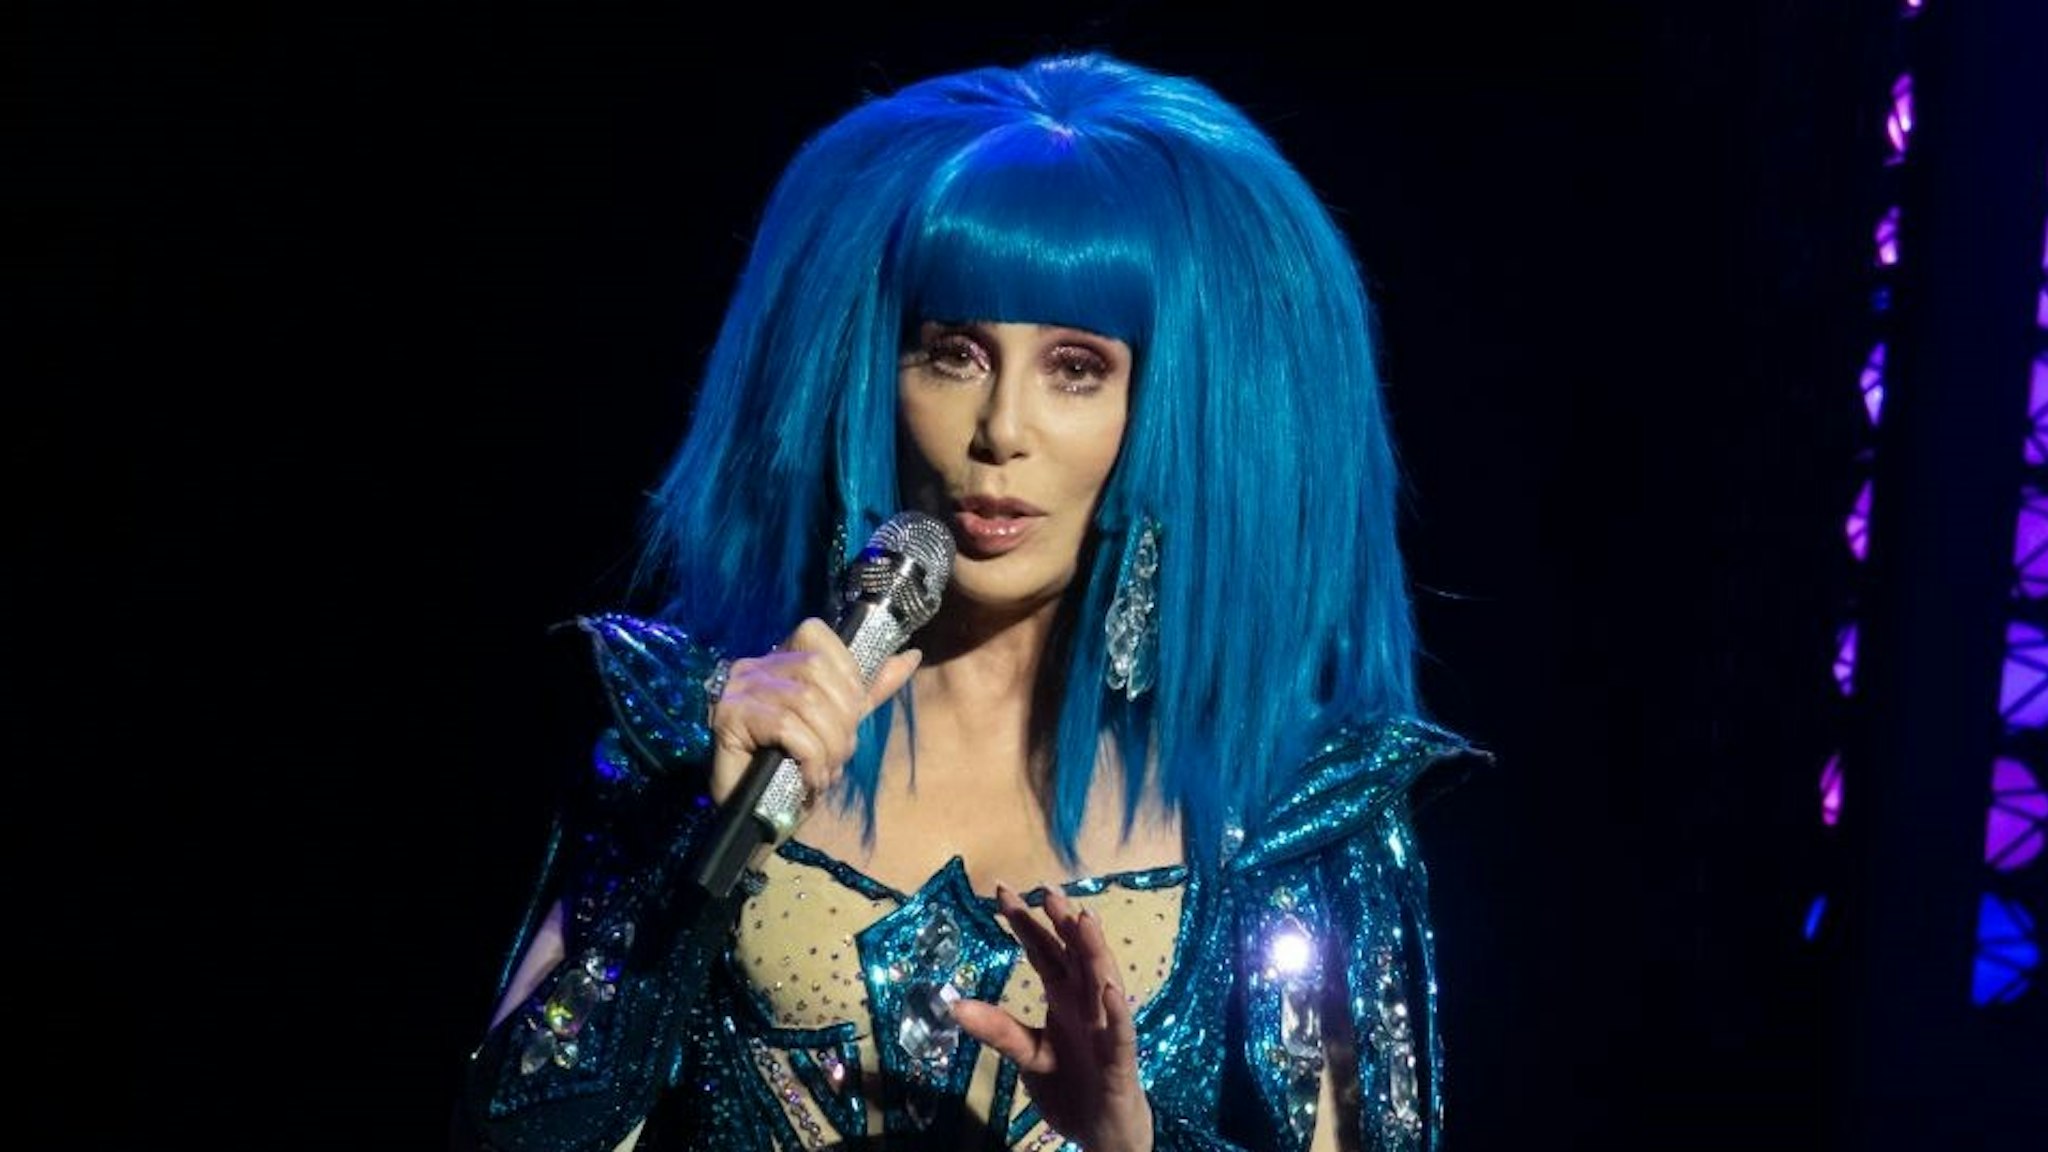 American singer Cher in concert with her Here We Go Again Tour at the SSE Hydro Arena in Glasgow. Glasgow (United Kingdom), October 28th, 2019 (photo by